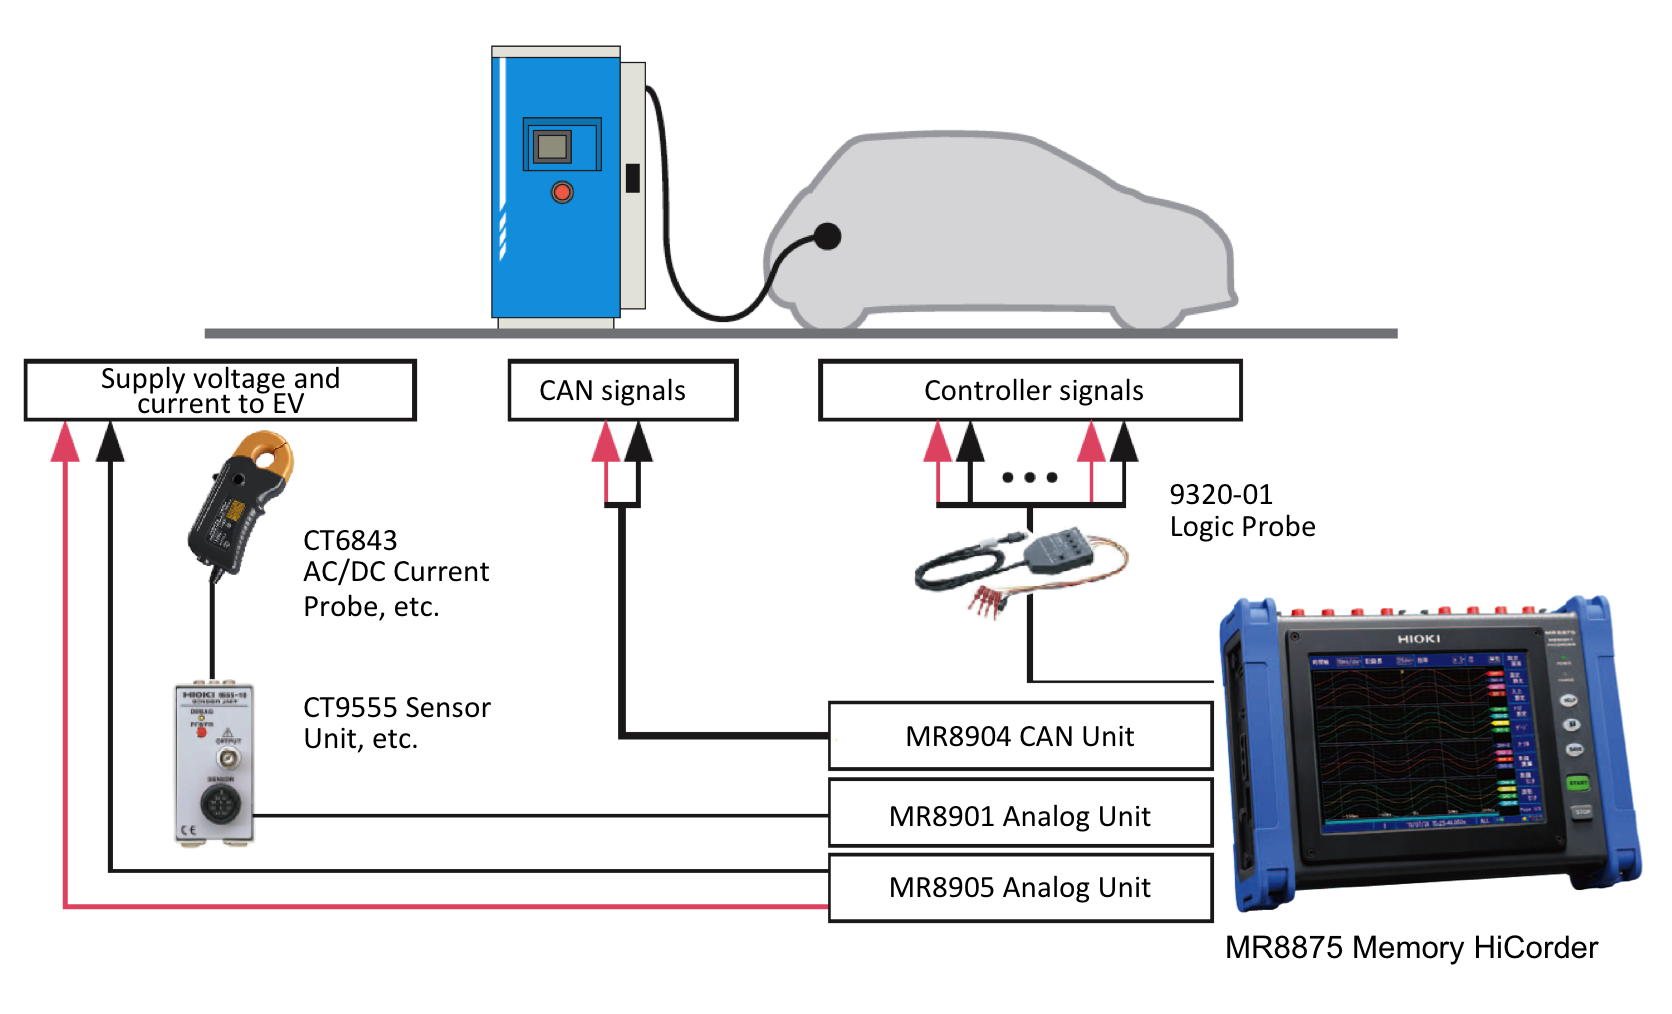 EV Charging Solutions, Sensors and DC Meters for EV Charging Stations